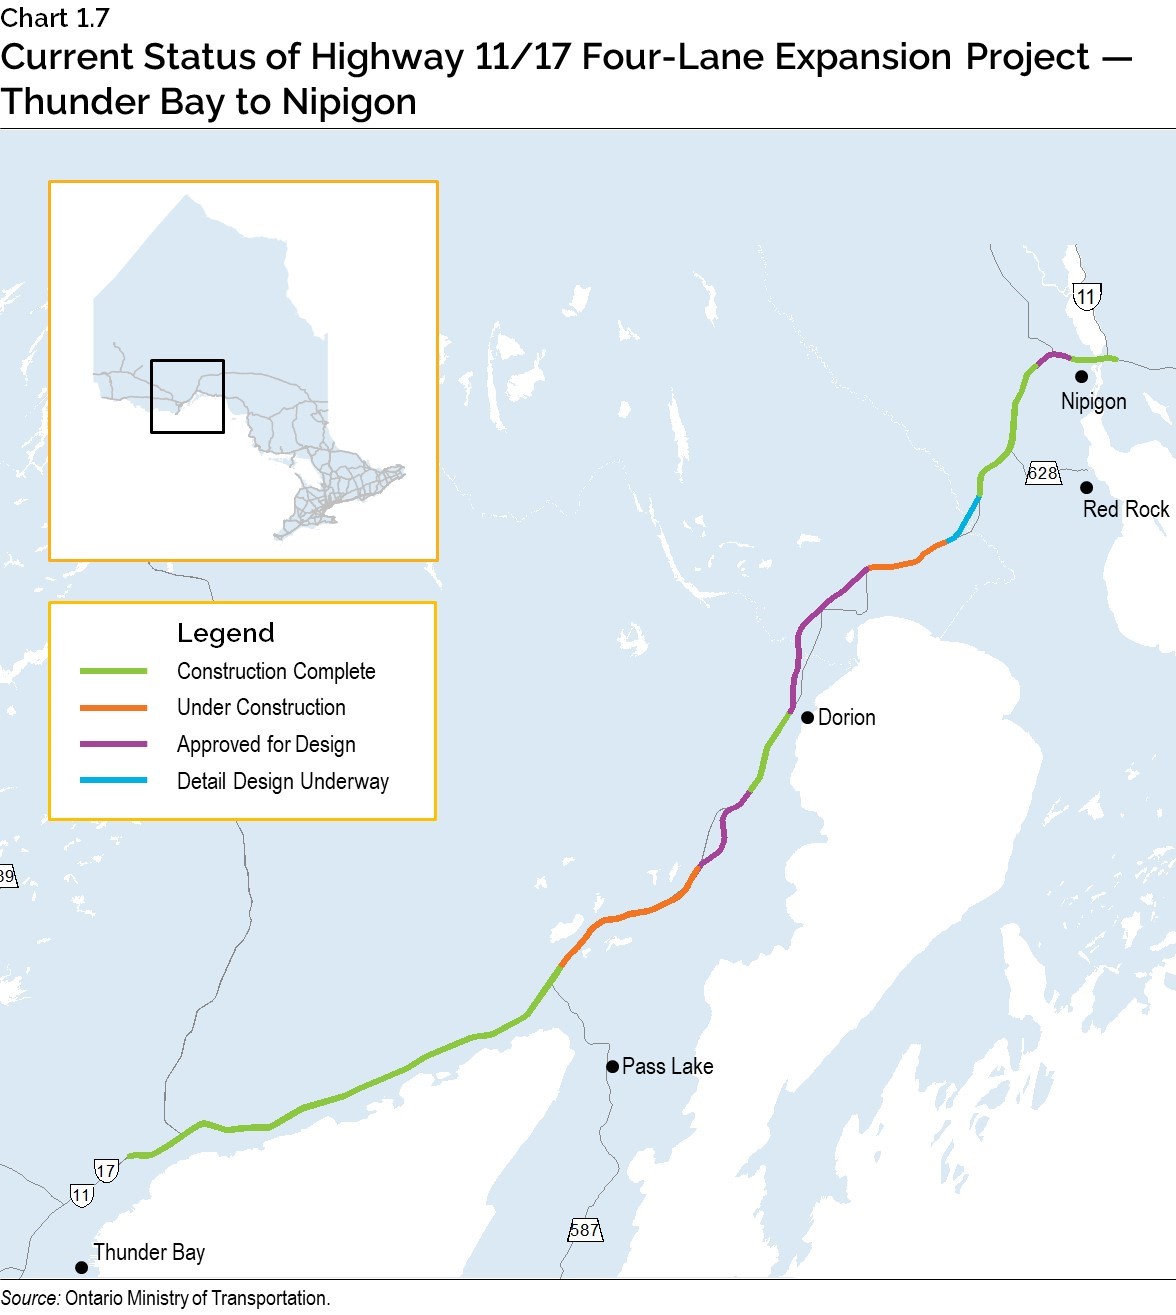 Chart 1.7: Current Status of Highway 11/17 Four Lane Expansion Project — Thunder Bay to Nipigon